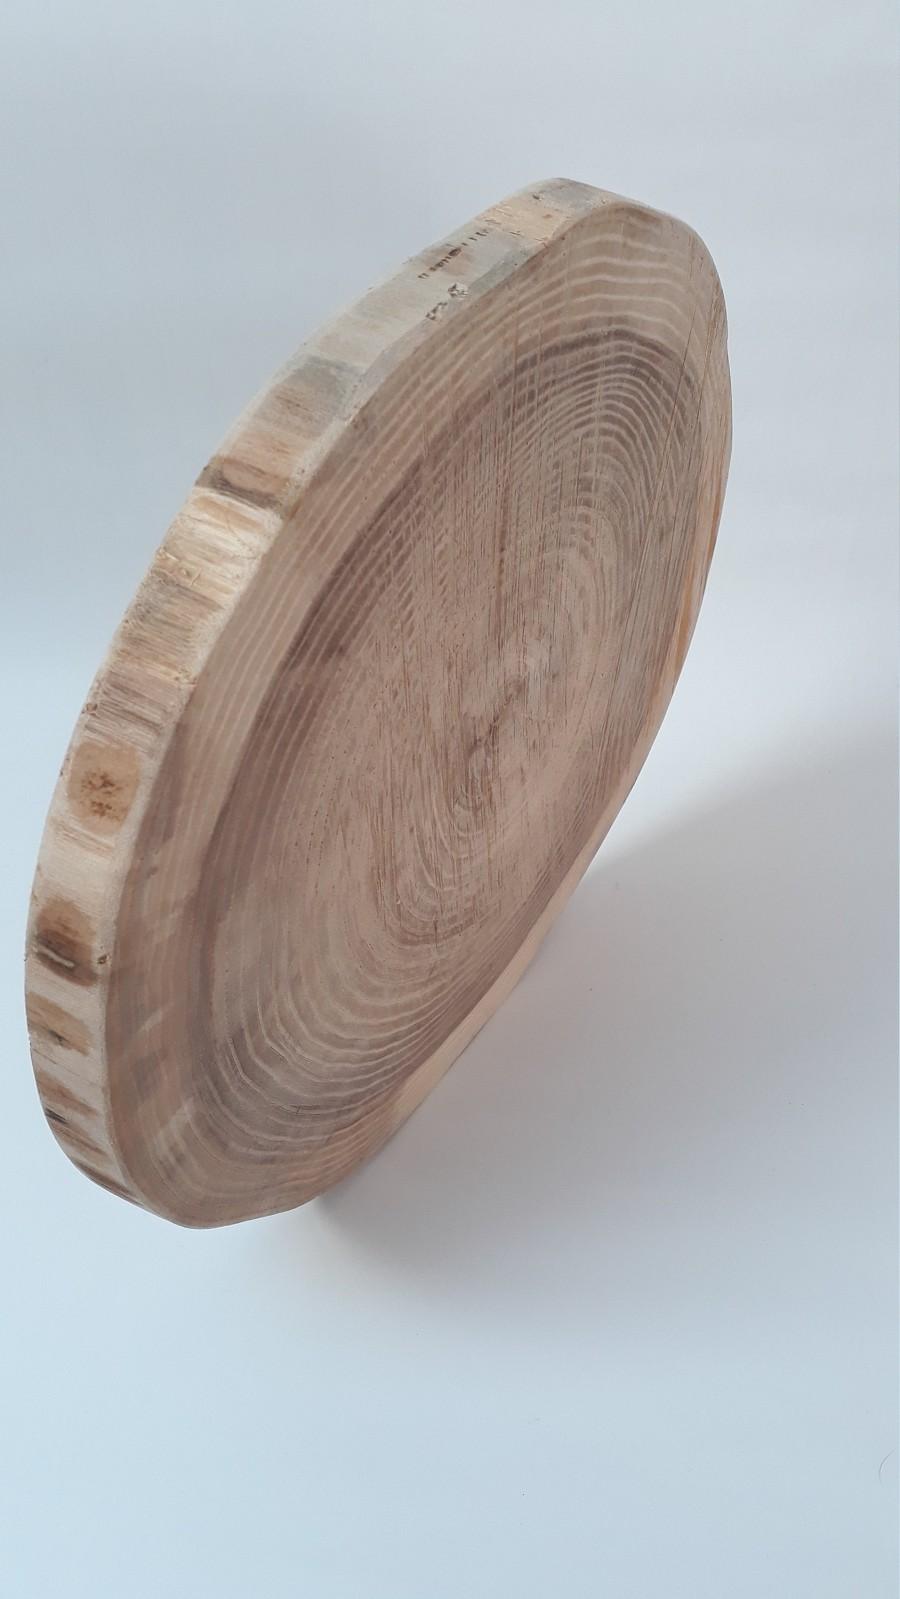 Wedding - Large slice of elm wood for decoration and much more